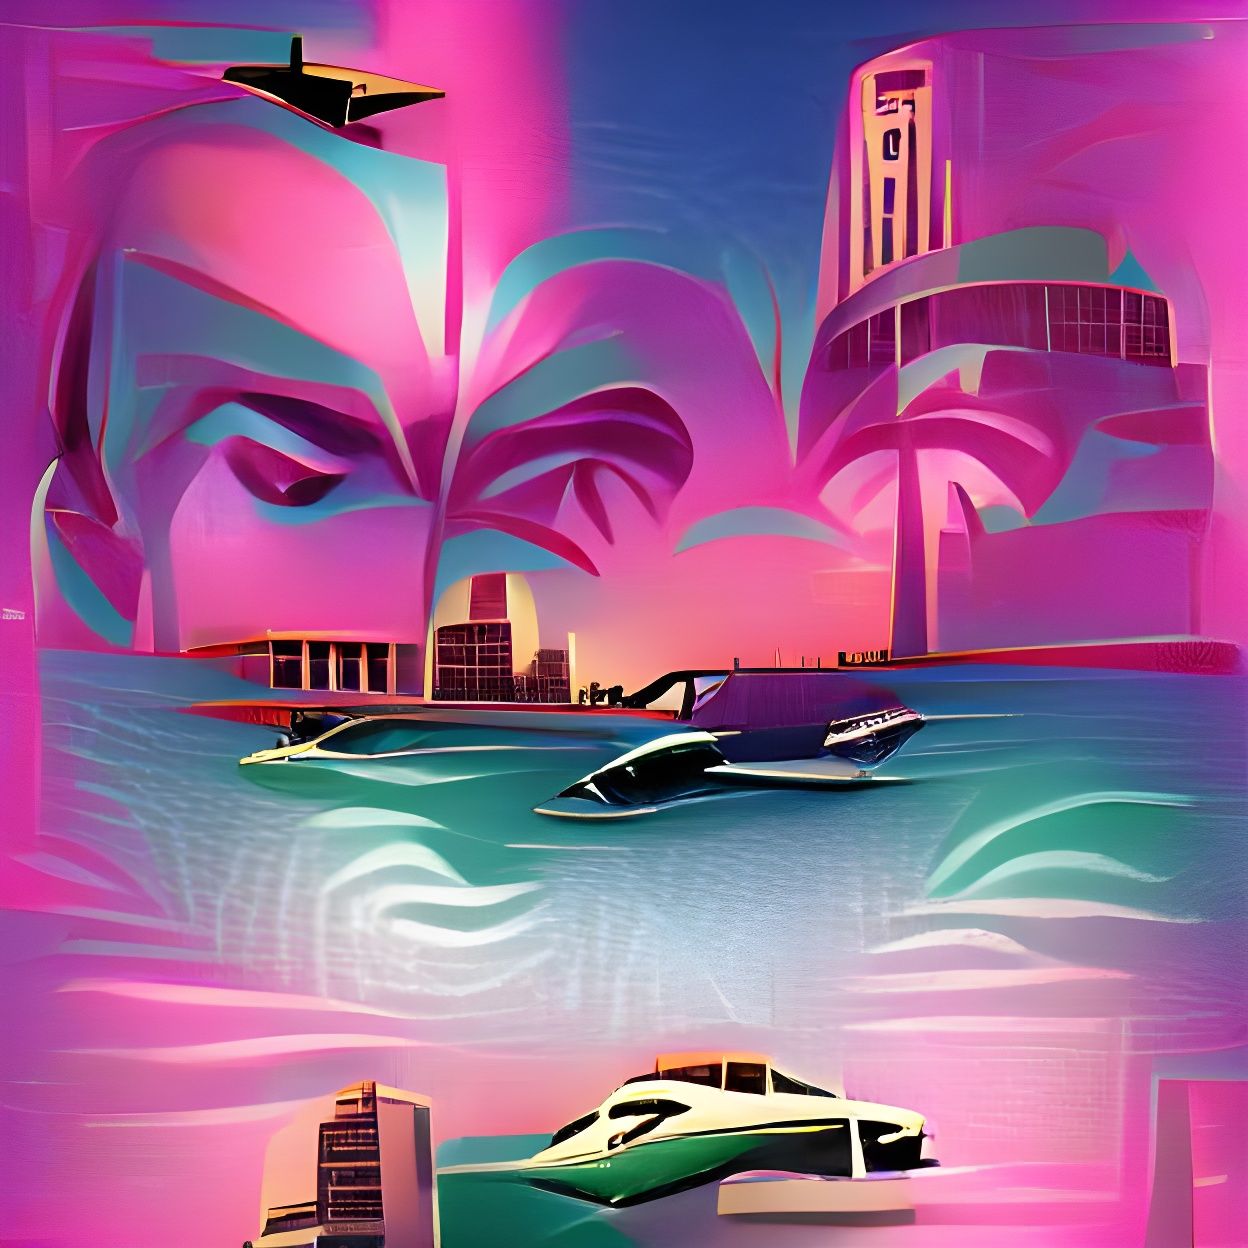 Grand Theft Auto Vice City Stories - City Logo - CleanPNG / KissPNG